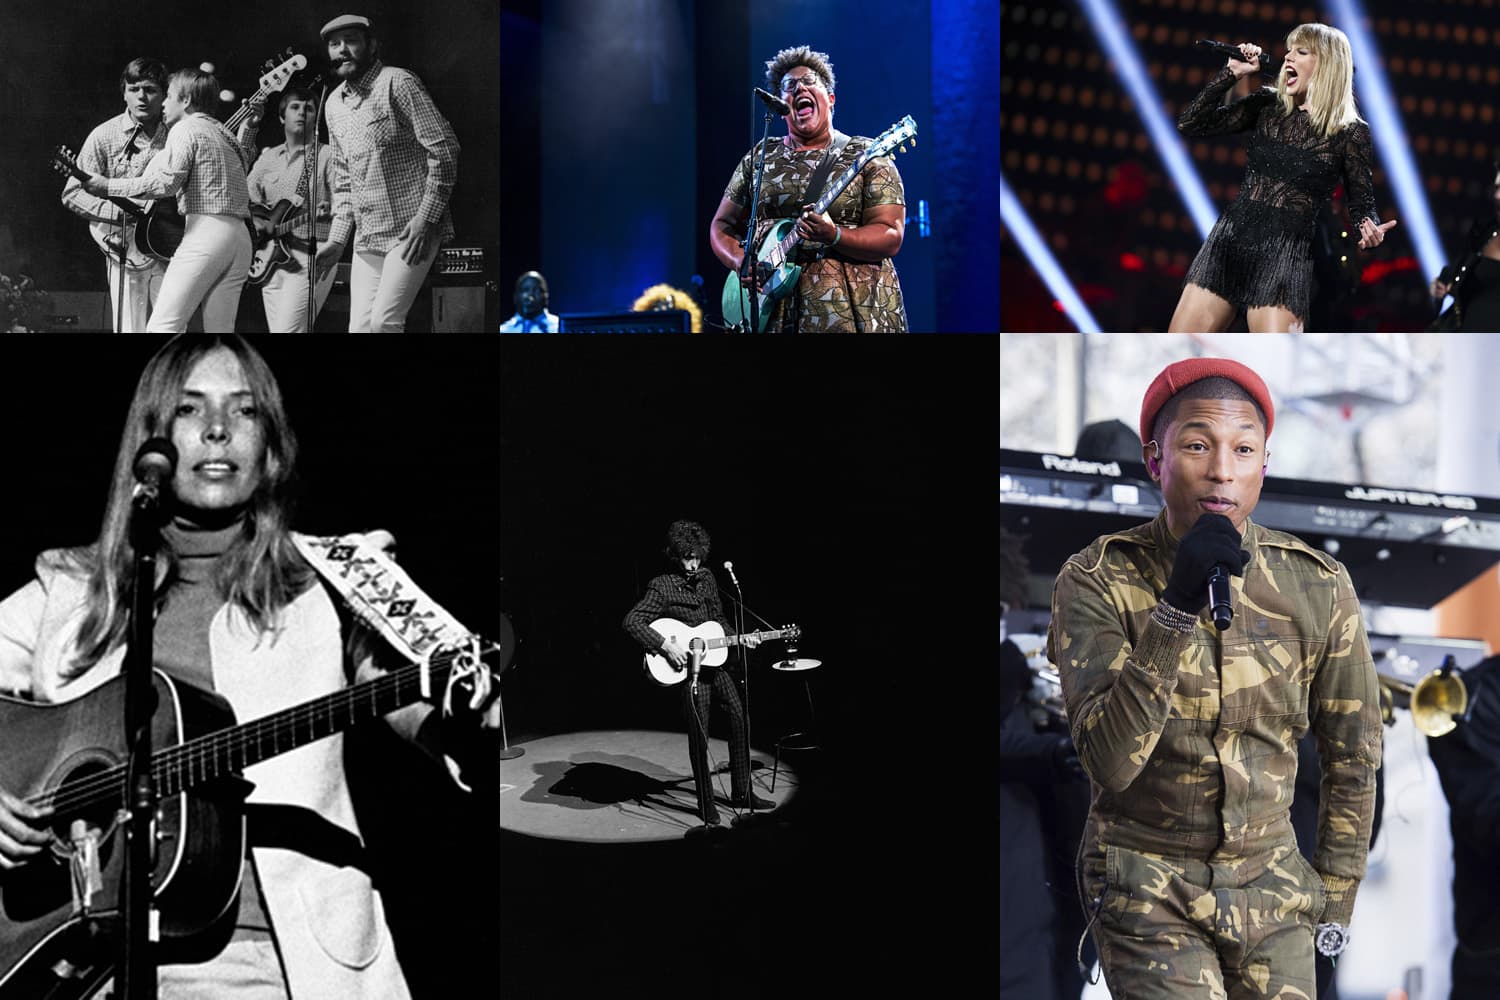 (Clockwise From Top Left) The Beach Boys, Brittany Howard of the Alabama Shakes, Taylor Swift, Pharrell Williams, Bob Dylan and Joni Mitchell in various performances throughout their respective careers. (AP/WikiCommons)